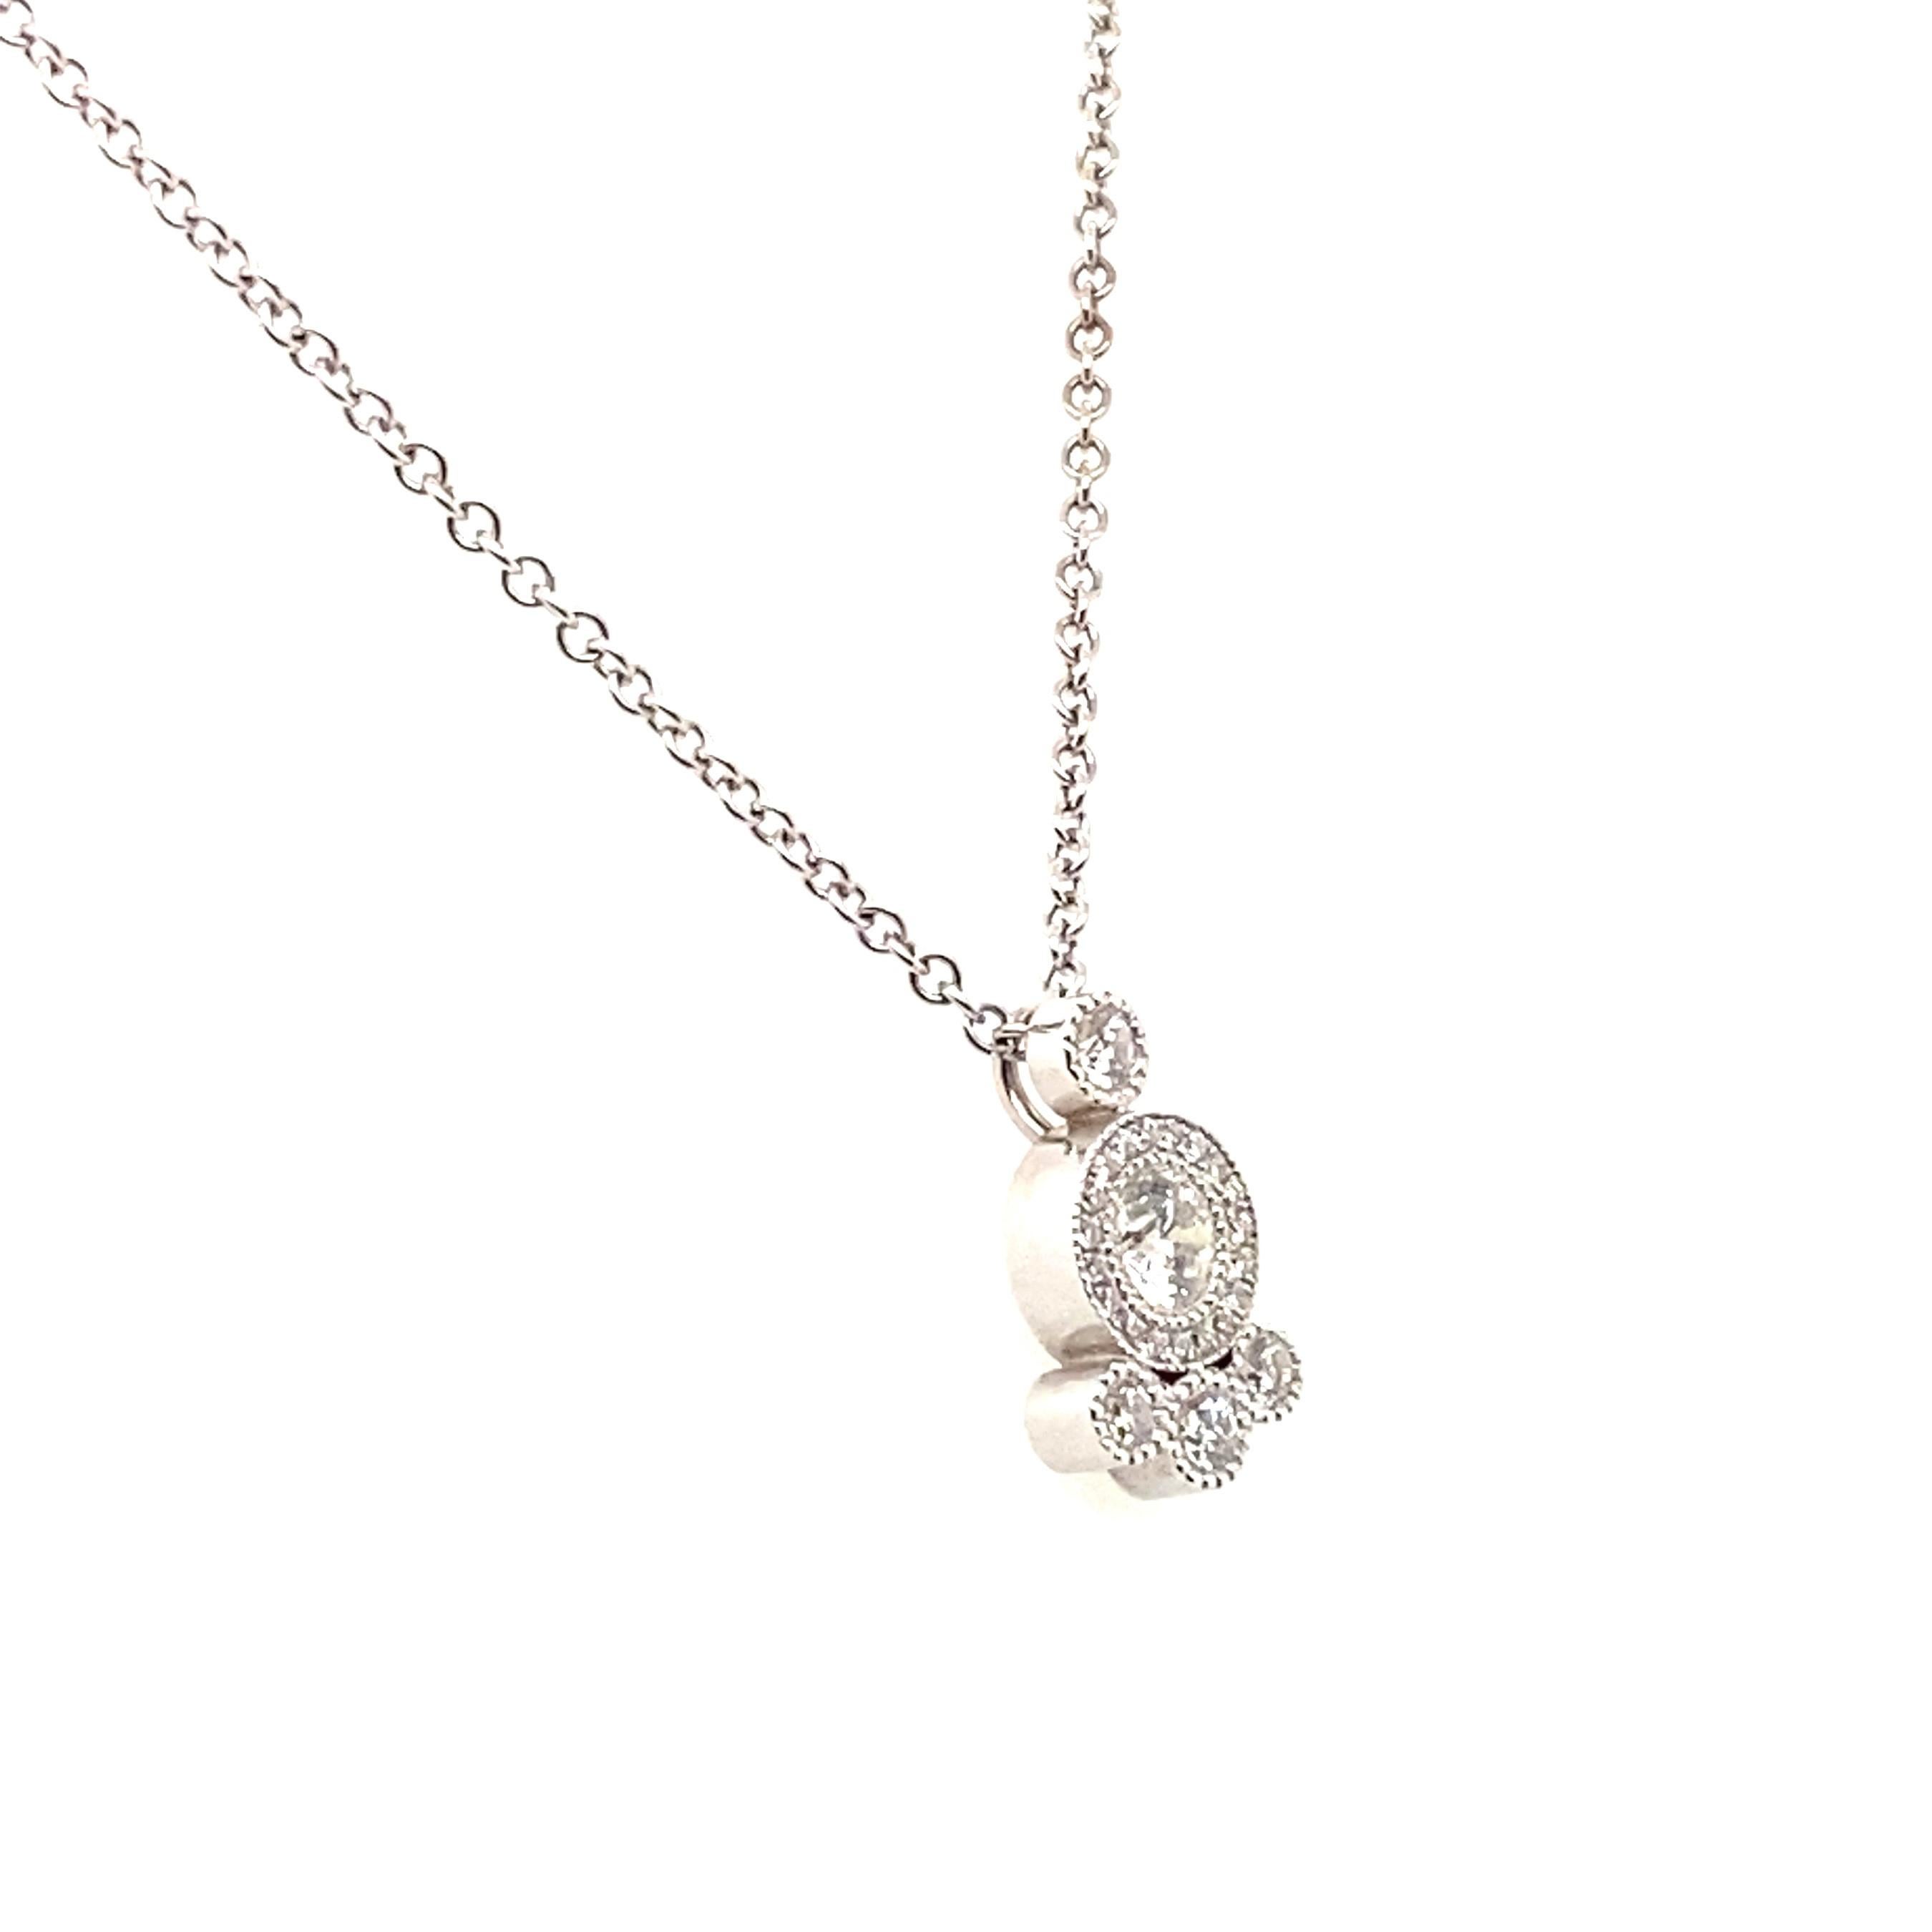 18 Karat white gold hand made diamond pendant featuring:
.25 Carat Forevermark diamond - responsible sourced with beautiful light return. 
The diamonds are framed in round halos  -- 23 round brilliant diamonds  .23 Carat Total Weight  G-H/VS 

.25